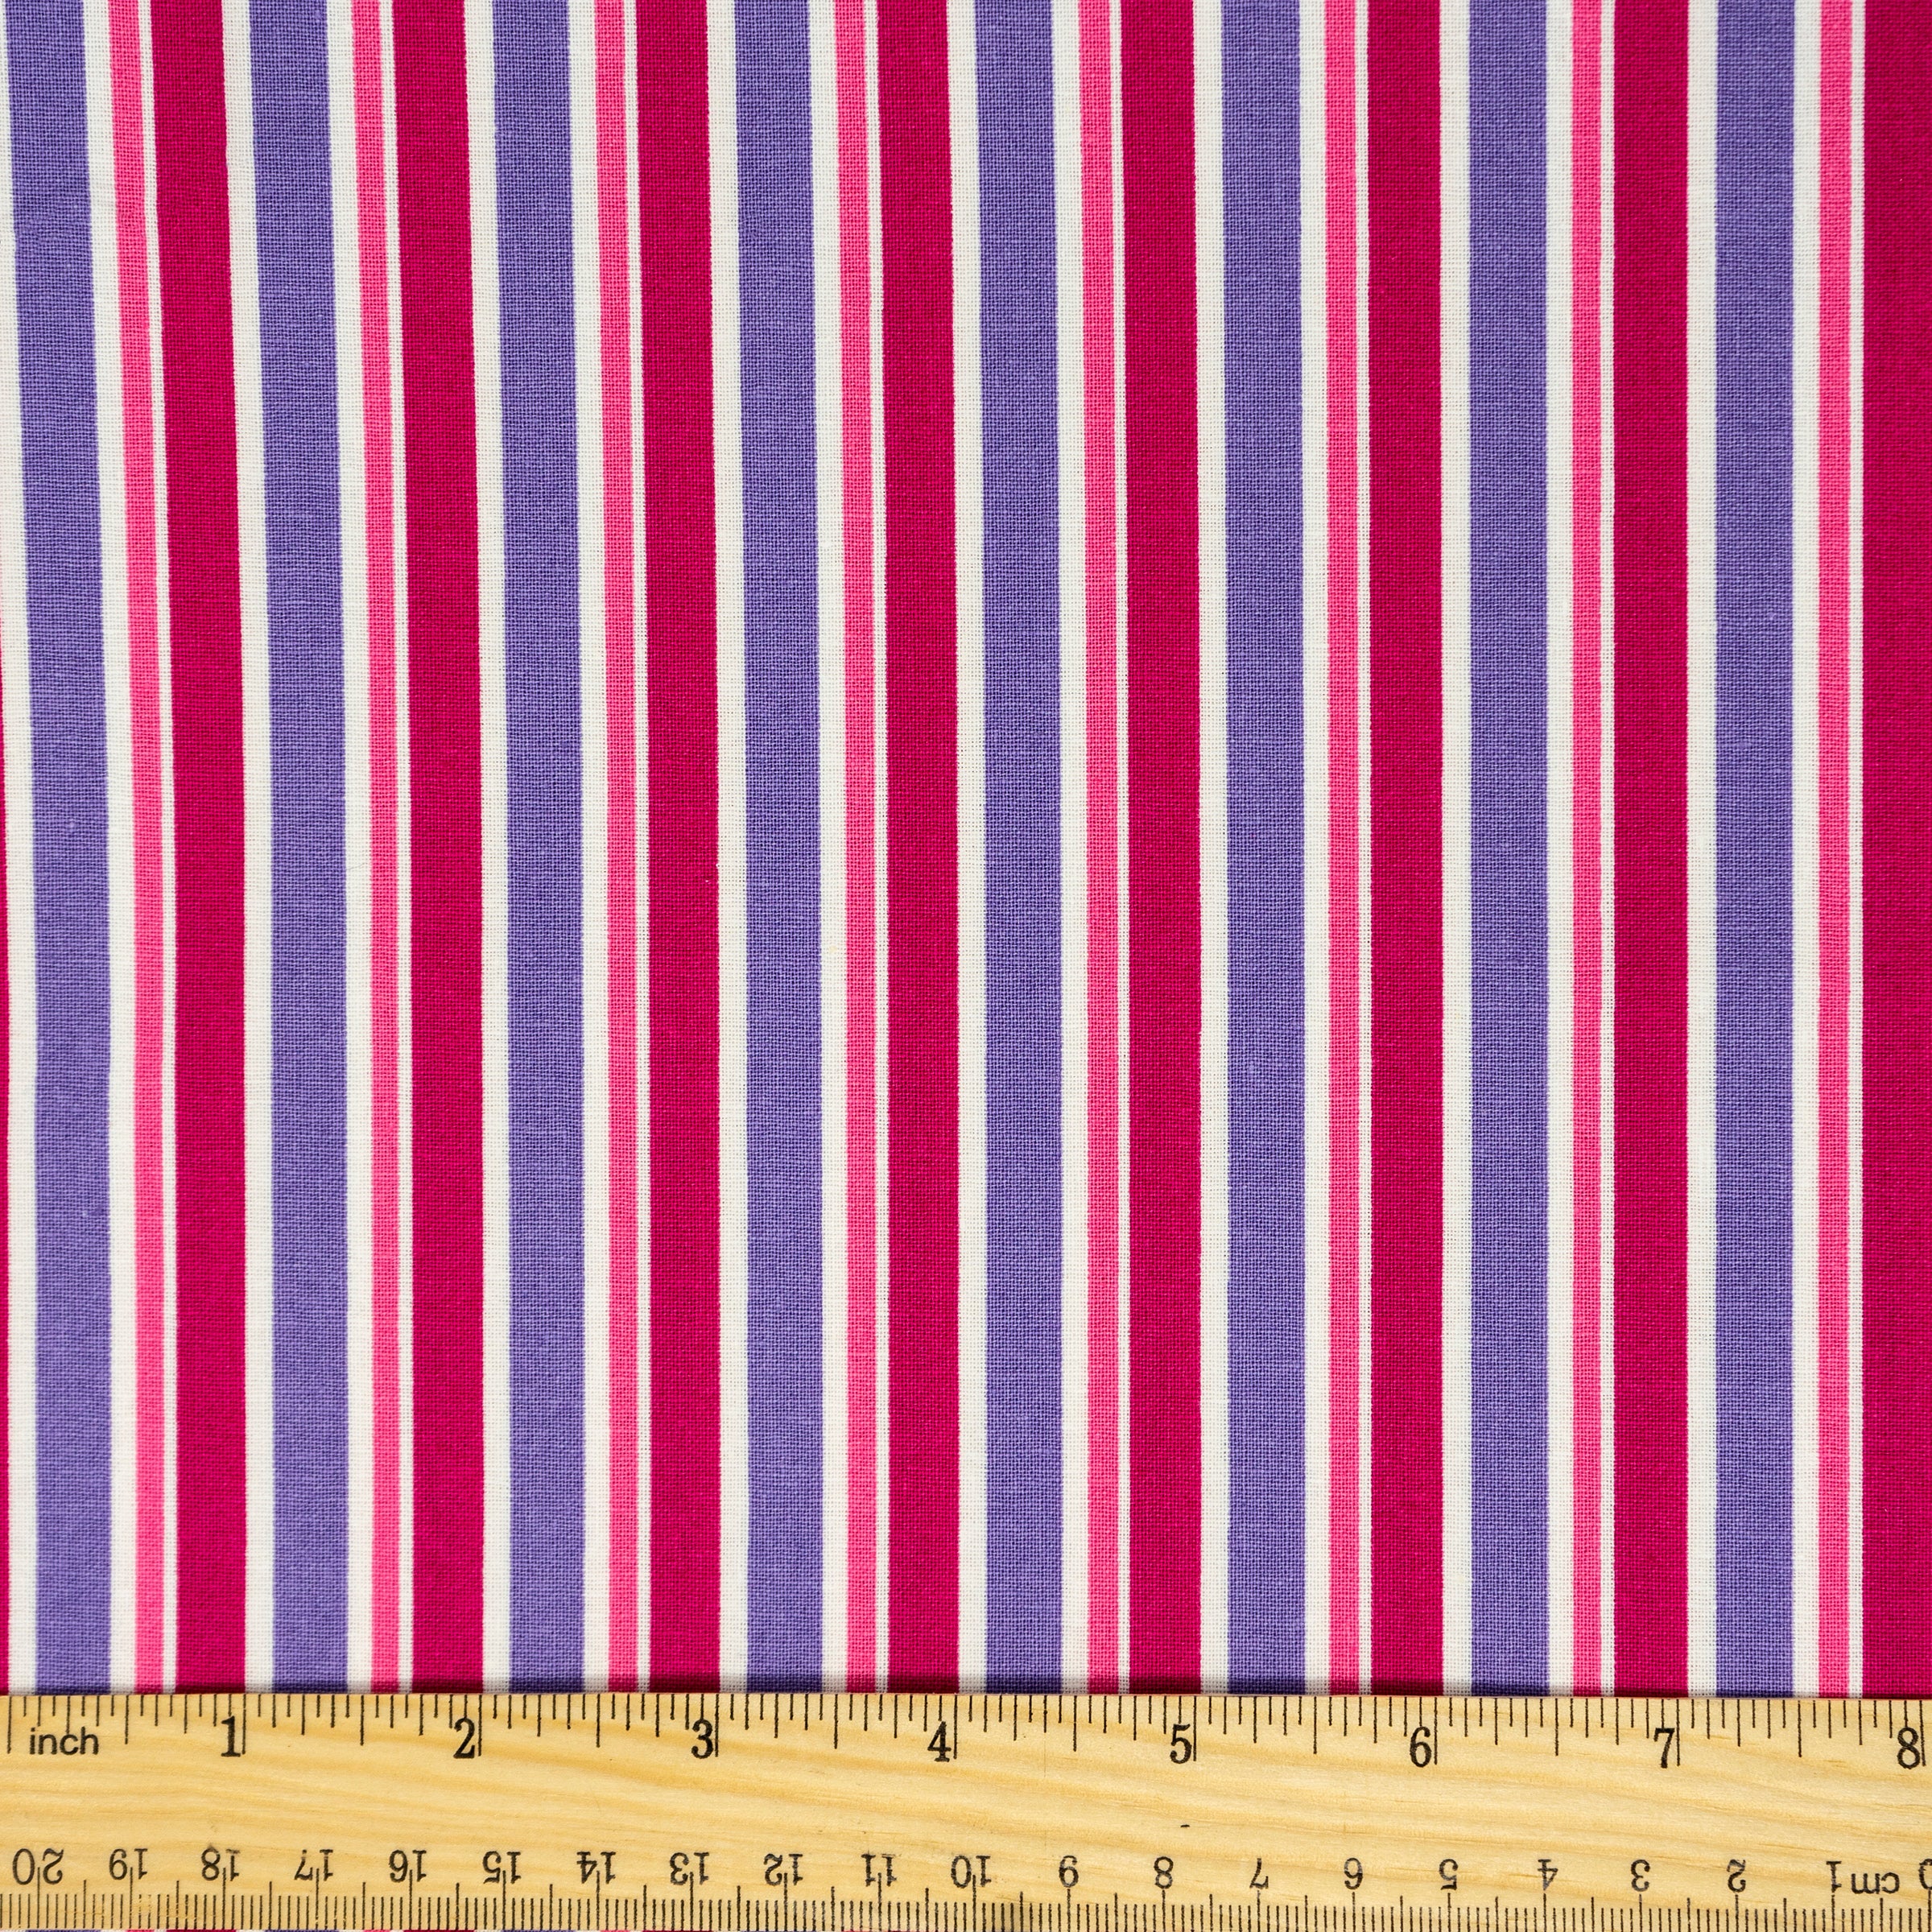 Waverly Inspirations 44" 100% Cotton Sailor Stripes Sewing & Craft Fabric By the Yard, White, Pink and Purple